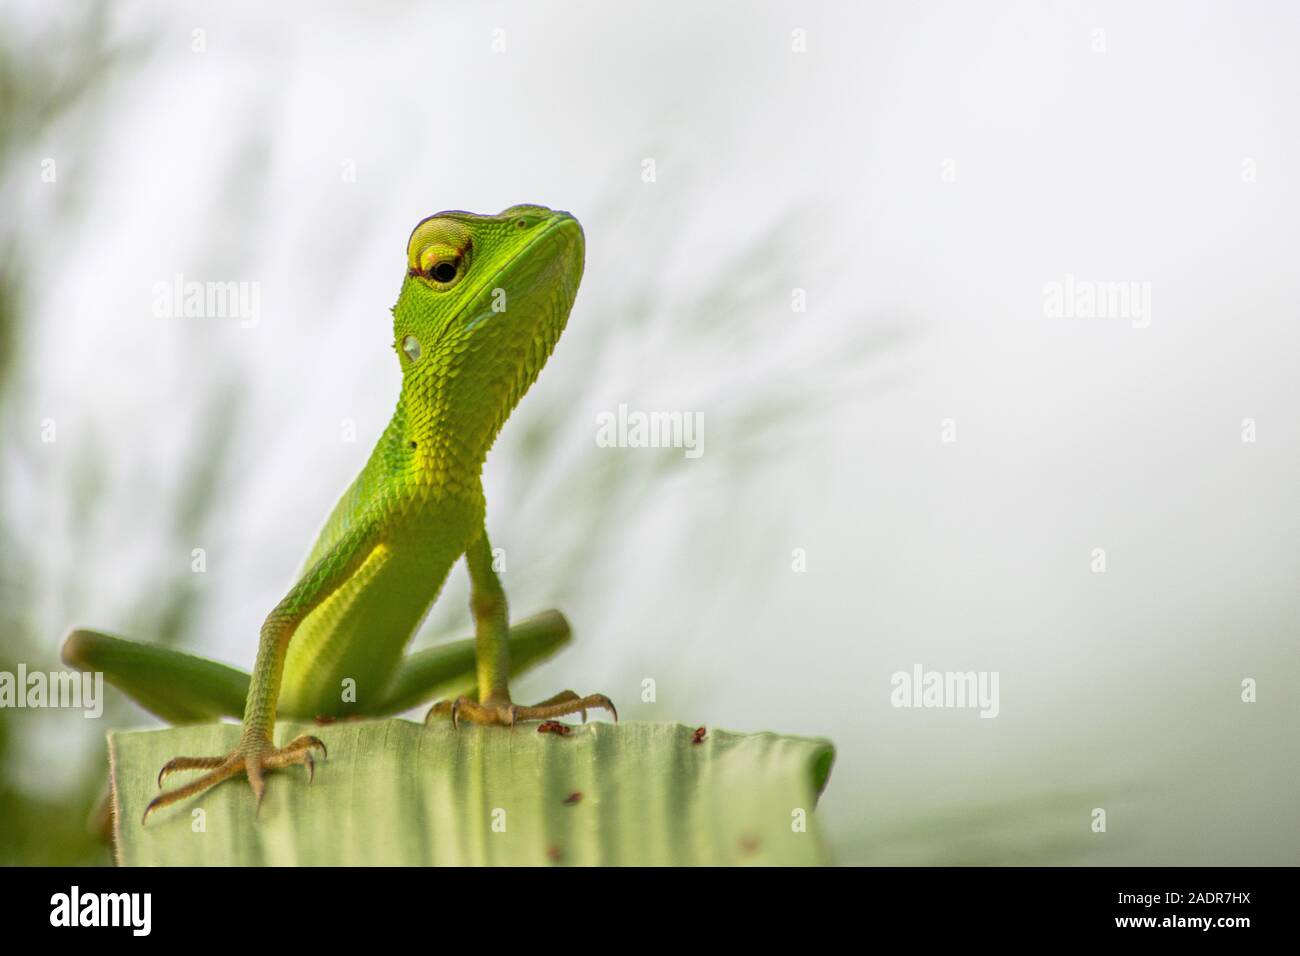 Lizards are a widespread group of squamate reptiles, with over 6,000 species,ranging across all continents except Antarctica, as well as most oceanic Stock Photo